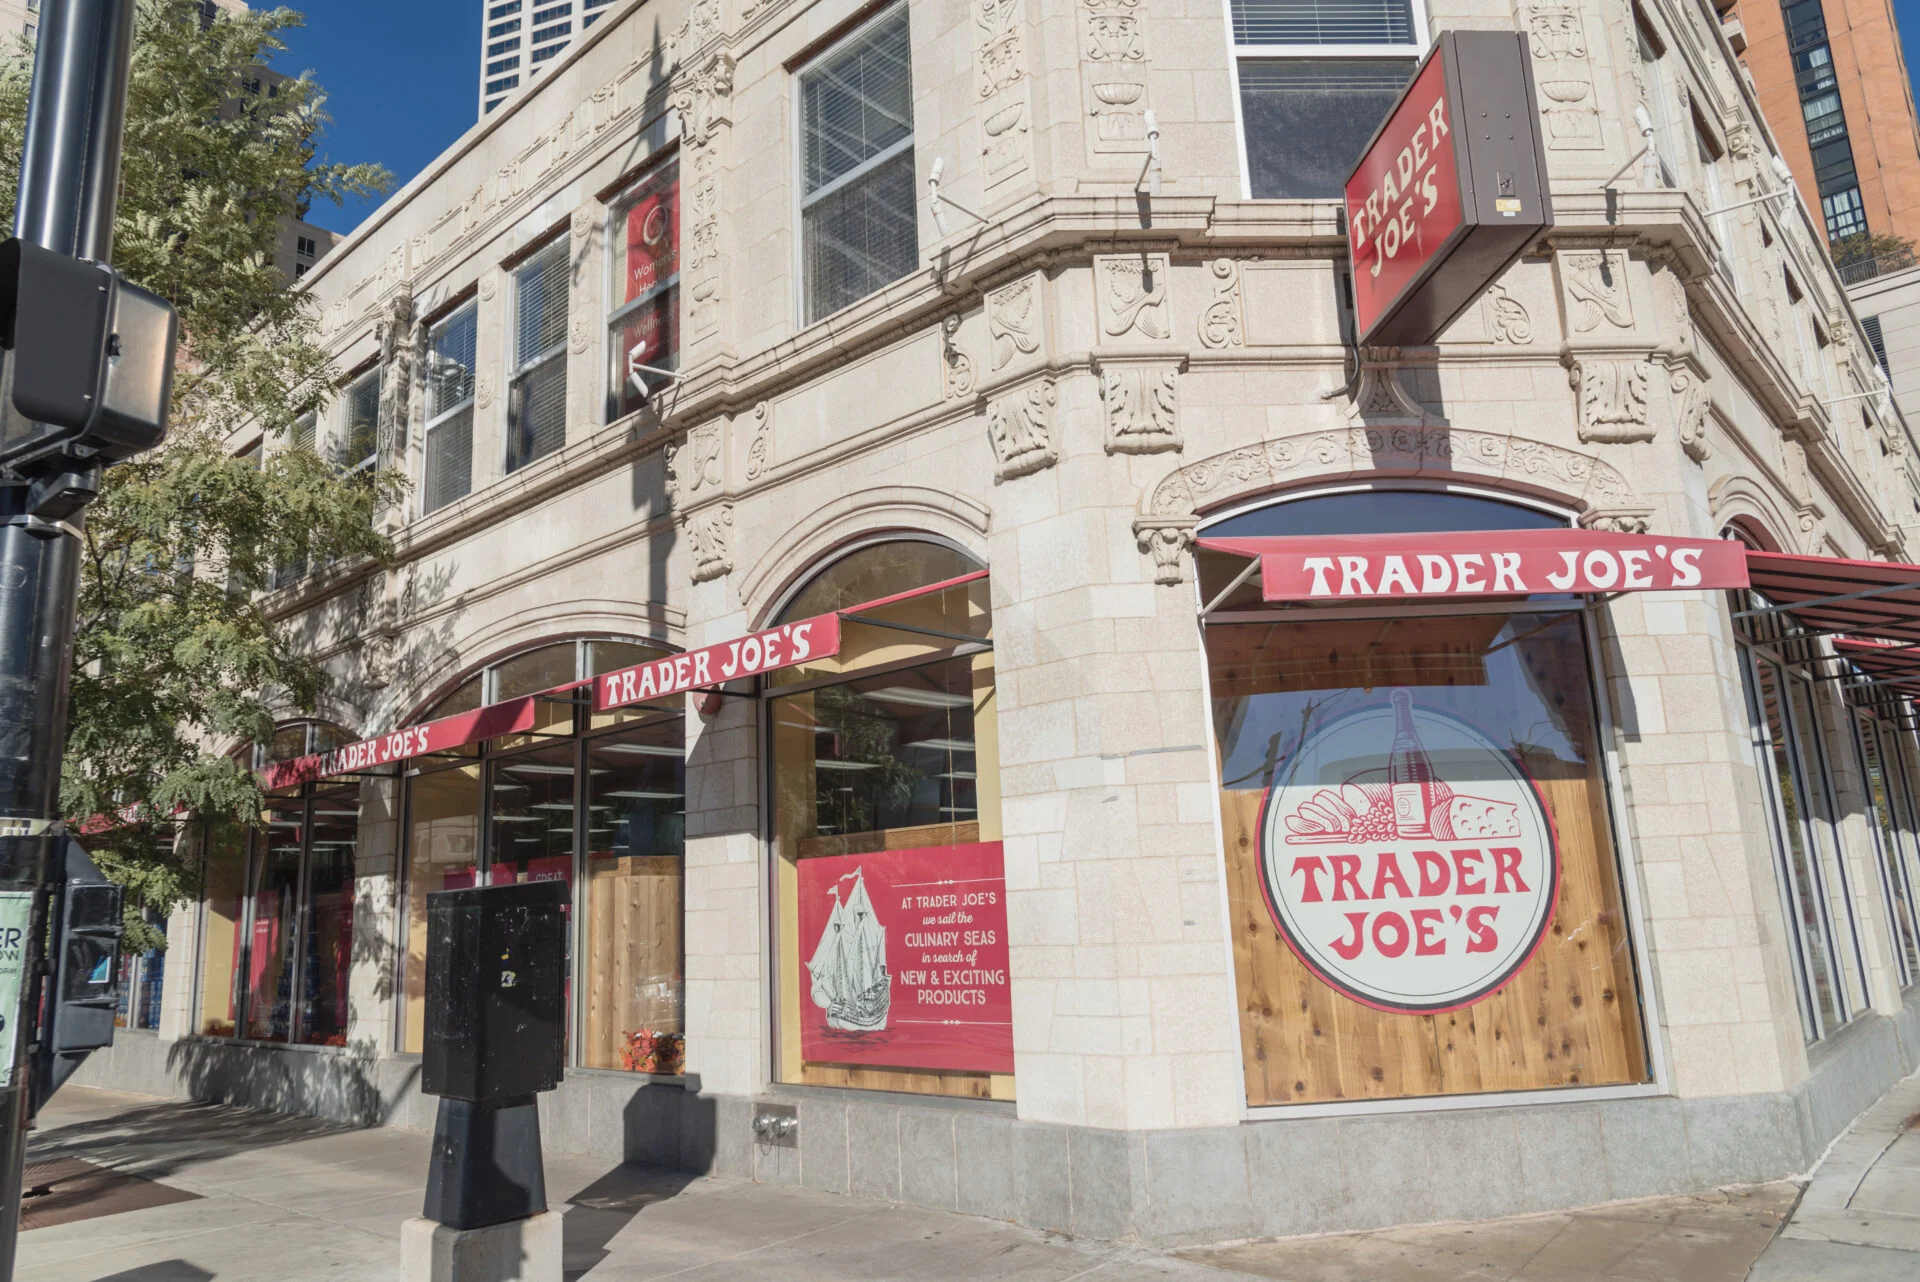 Trader joes in Chicago, Illinois